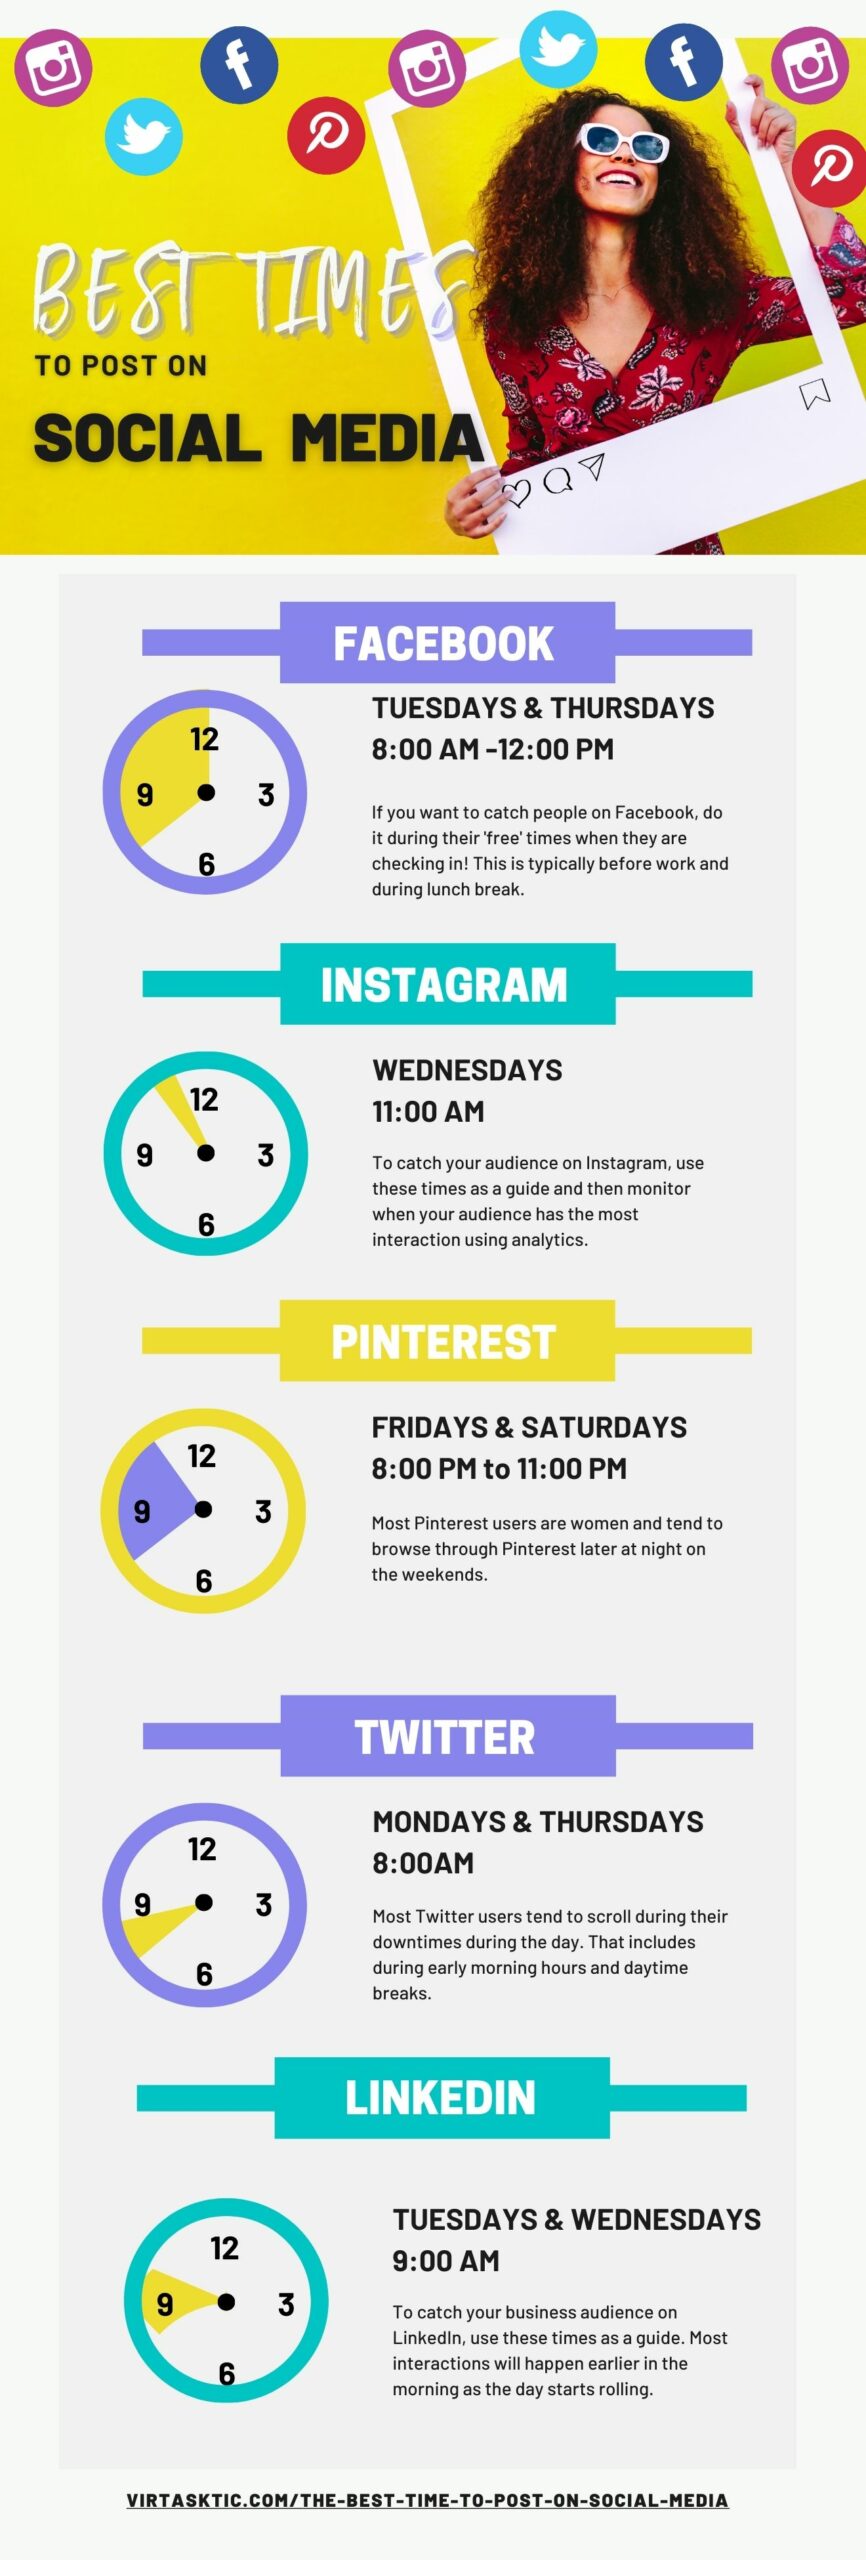 best times to post on social media - infographic final